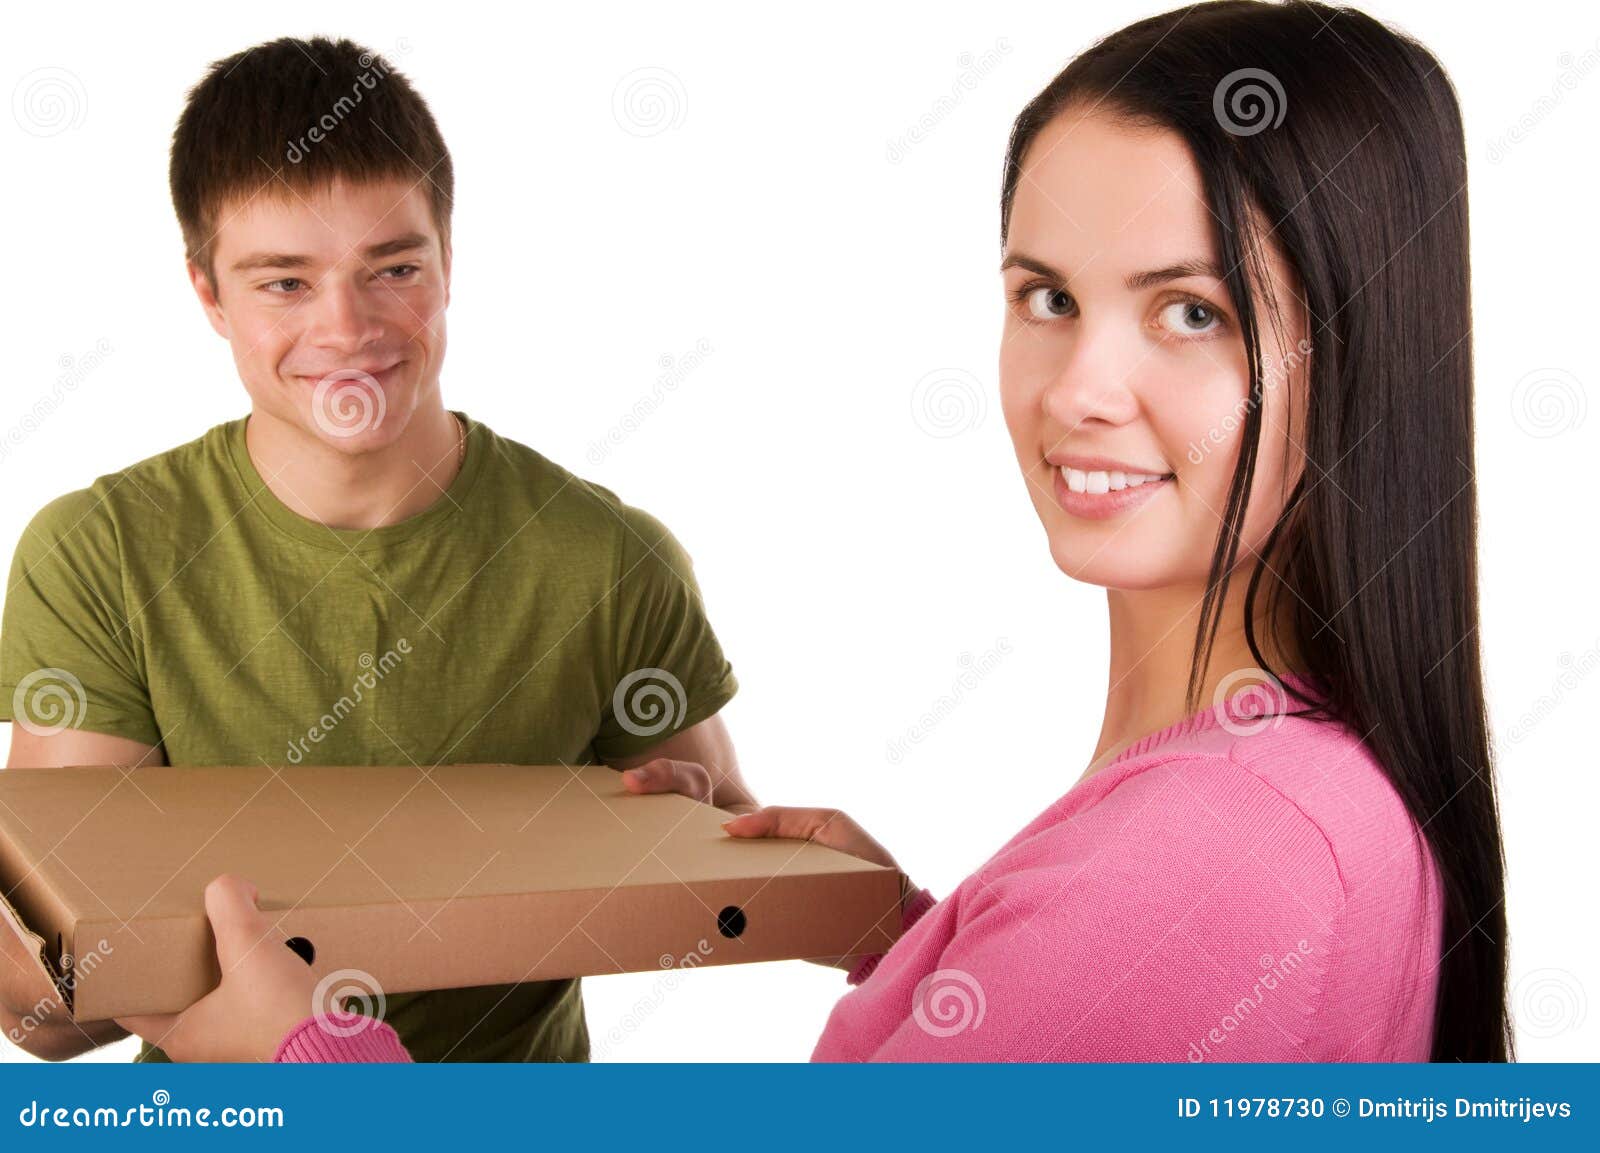 woman receive for a package